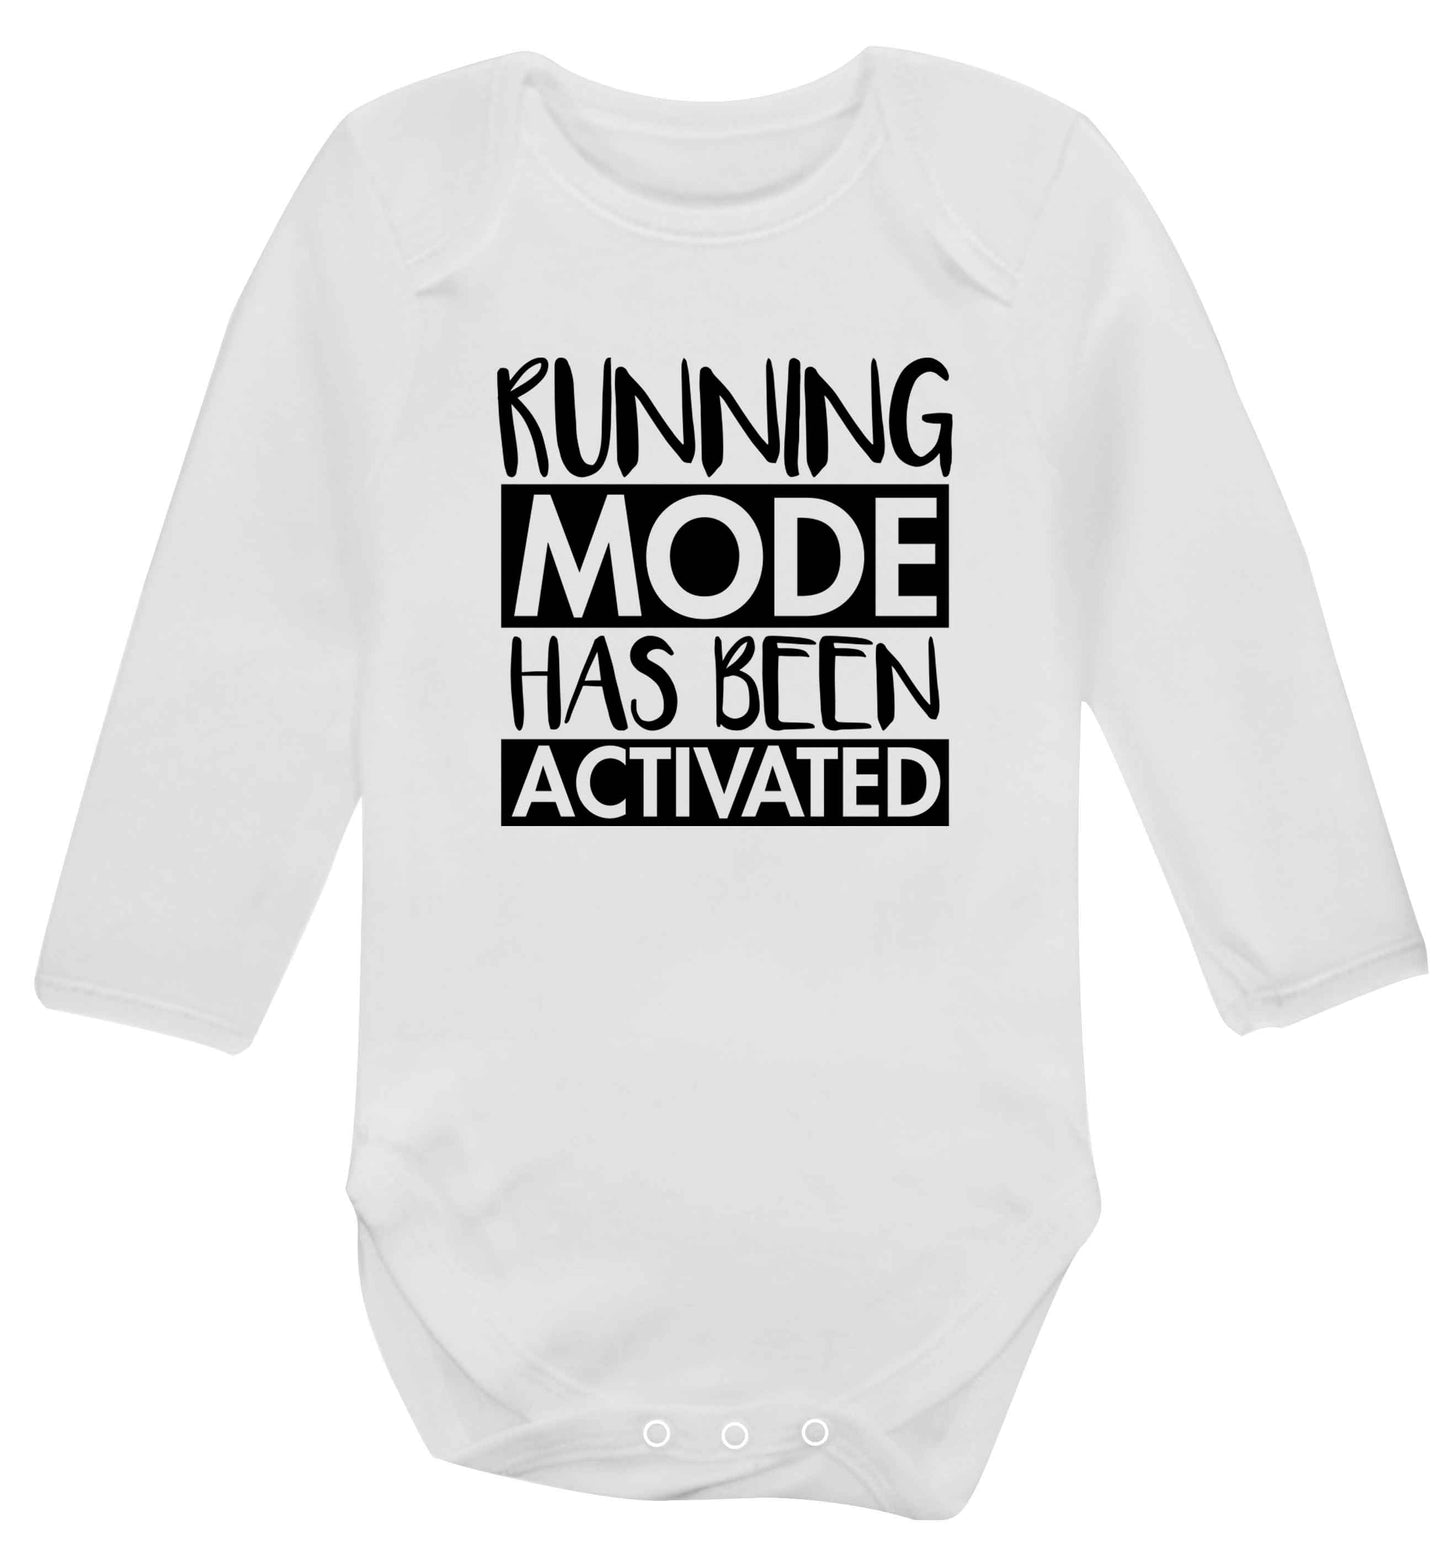 Running mode has been activated baby vest long sleeved white 6-12 months